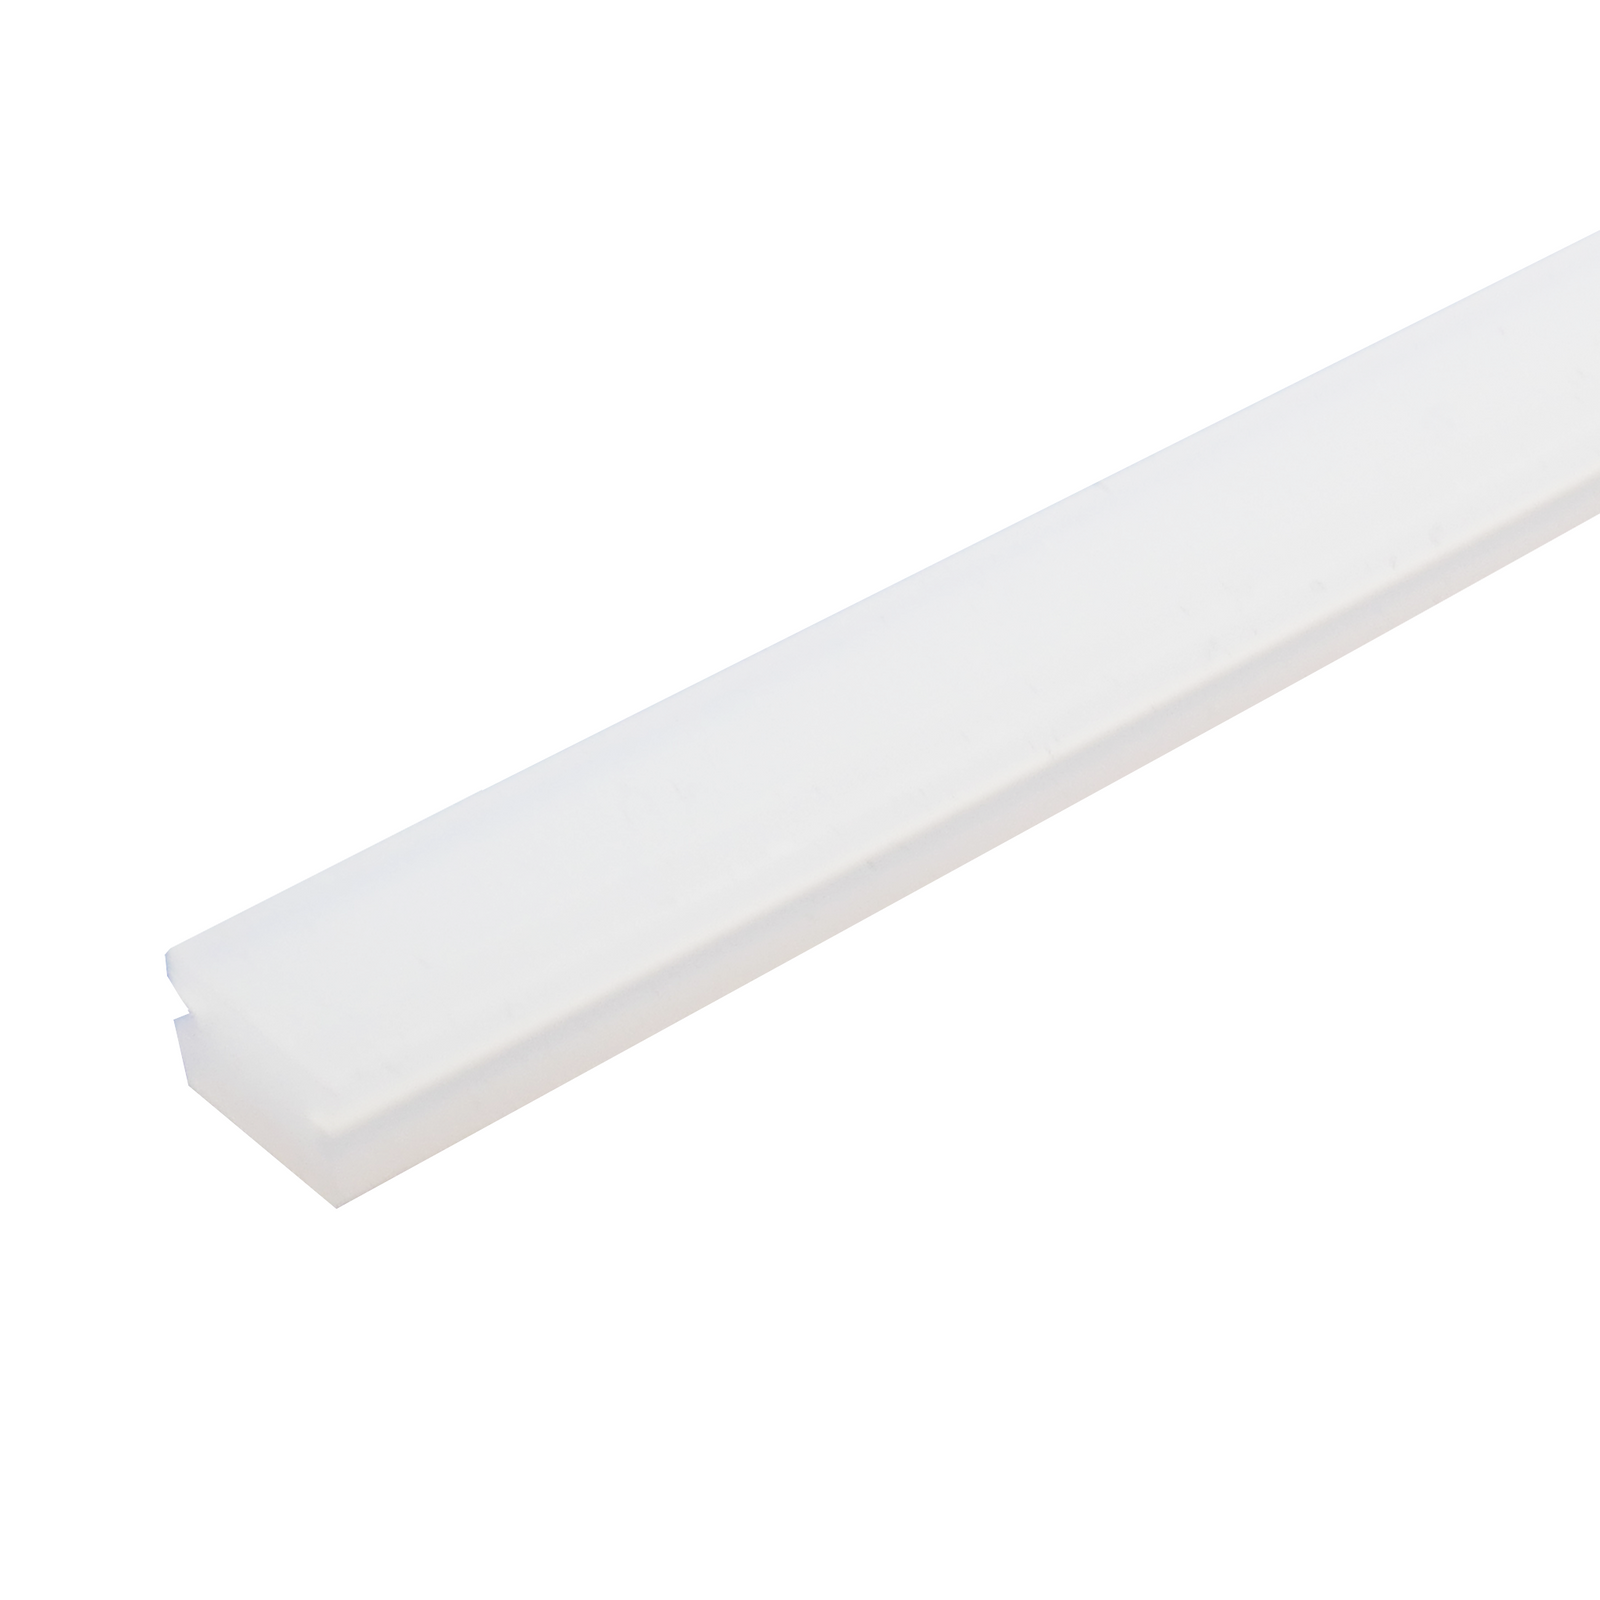 White silicone rubber used on manual Impulse sealers